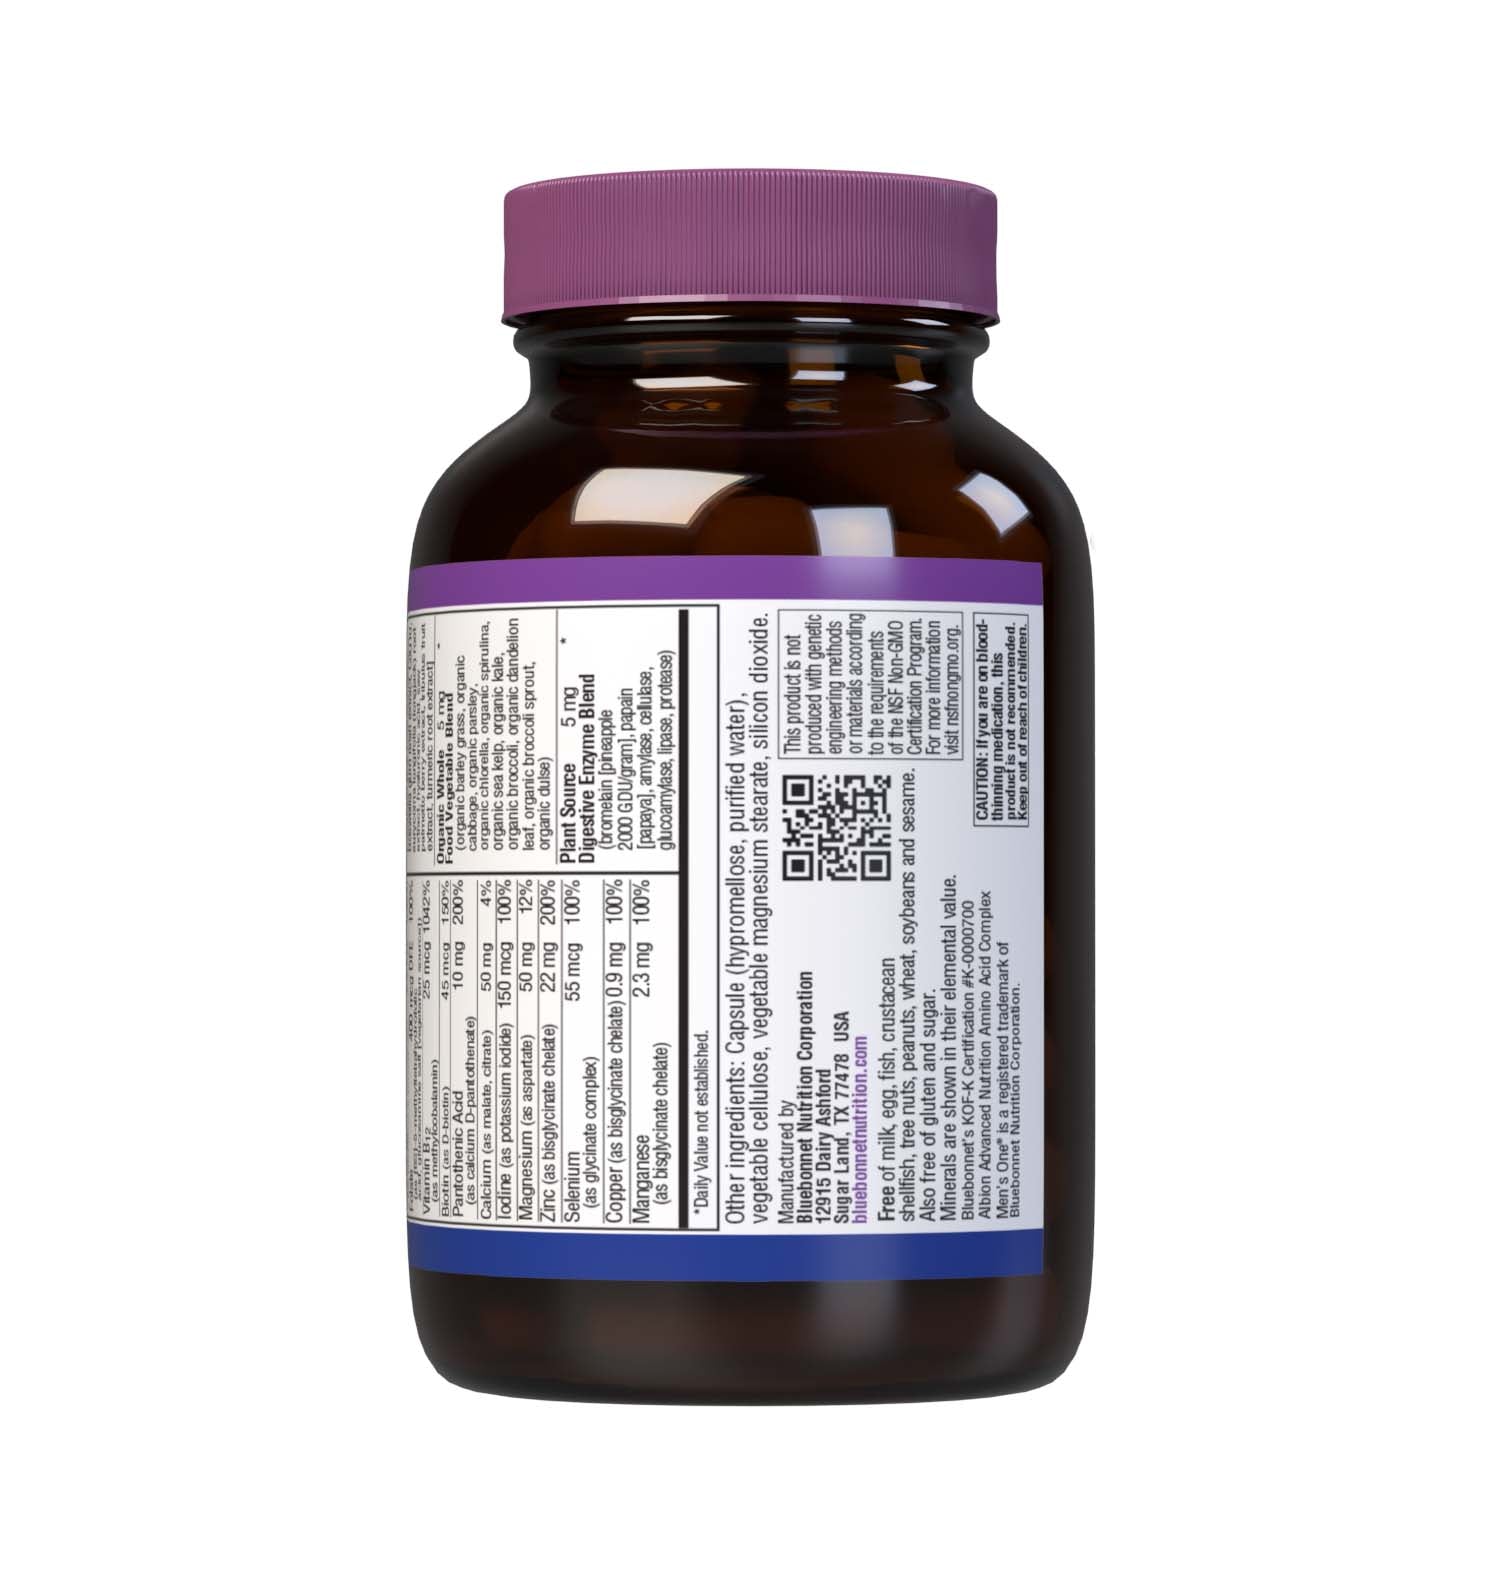 Bluebonnet’s Men’s ONE 40+ Whole Food-Based Multiple 30 Vegetable Capsules are formulated for daily nutritional support and vitality for men over 40, helping to increase energy and vitality, aid joint comfort, maintain prostate health, and support heart health. Supplement facts panel bottom. #size_30 count